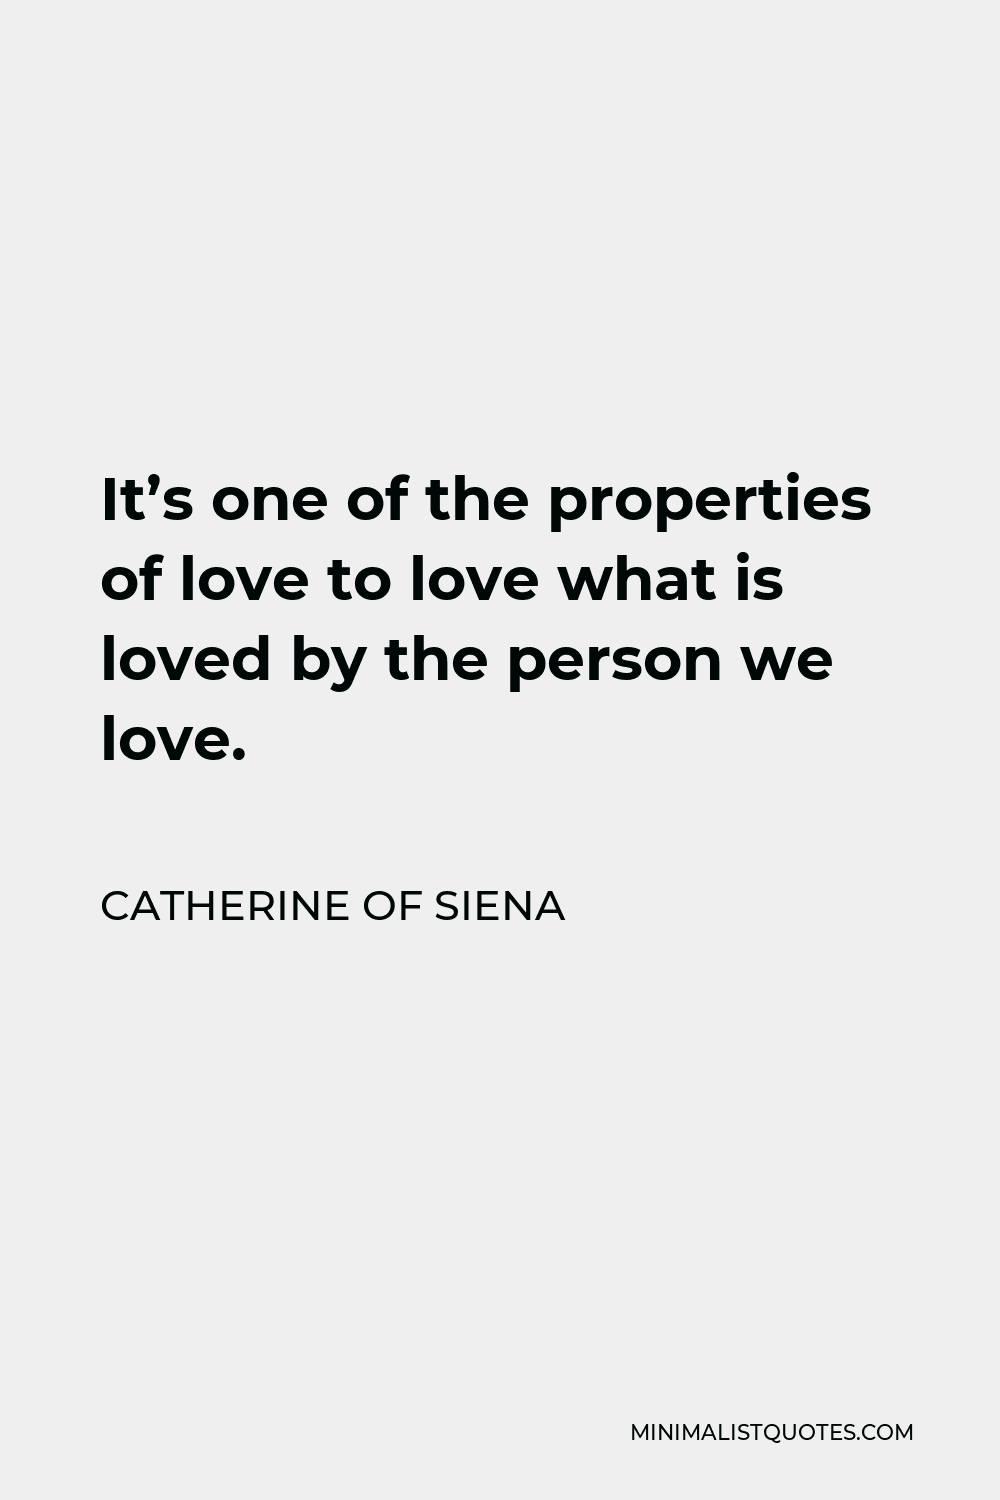 Catherine of Siena Quote - It’s one of the properties of love to love what is loved by the person we love.